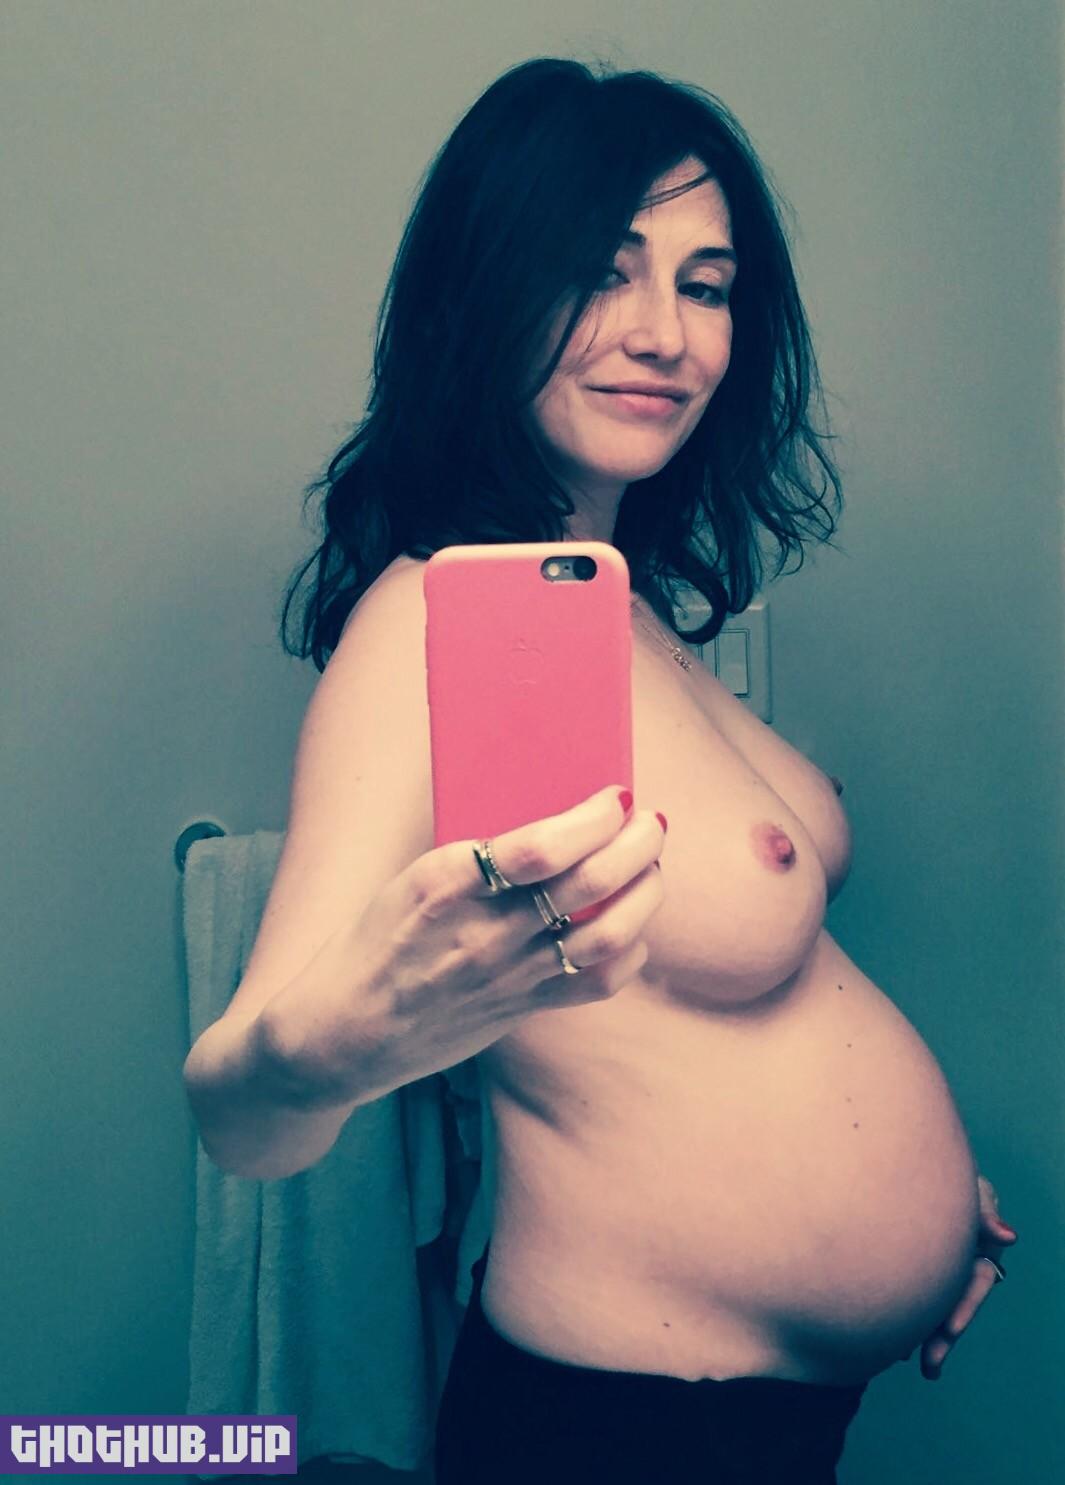 Carice Van Houten nude pregnant photos leaked The Fappening